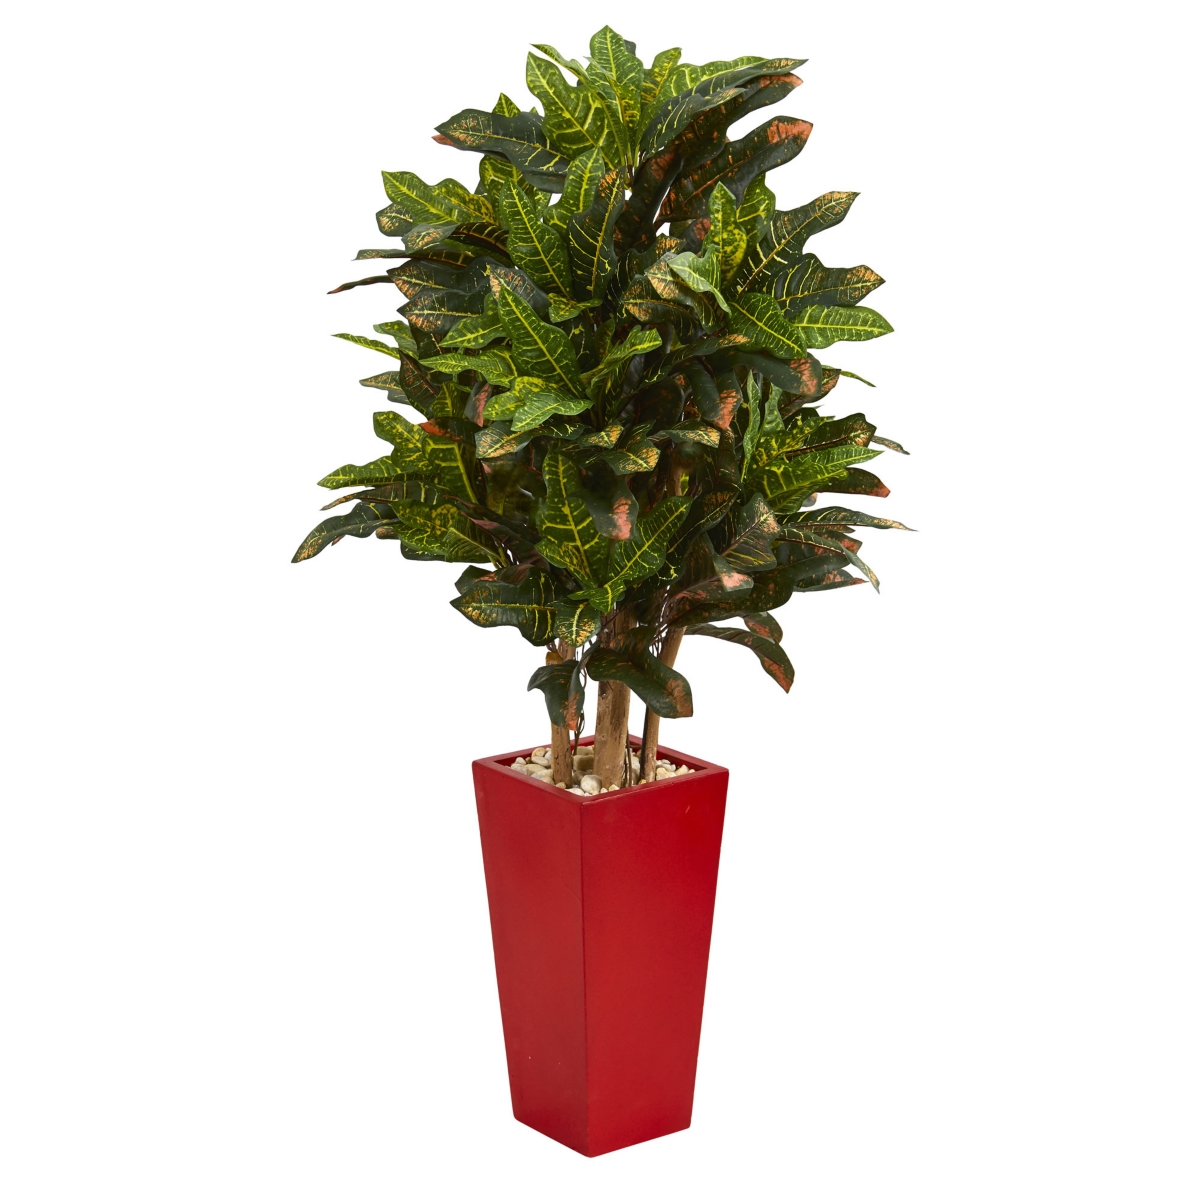 4' Croton Artificial Plant in Red Planter - Green